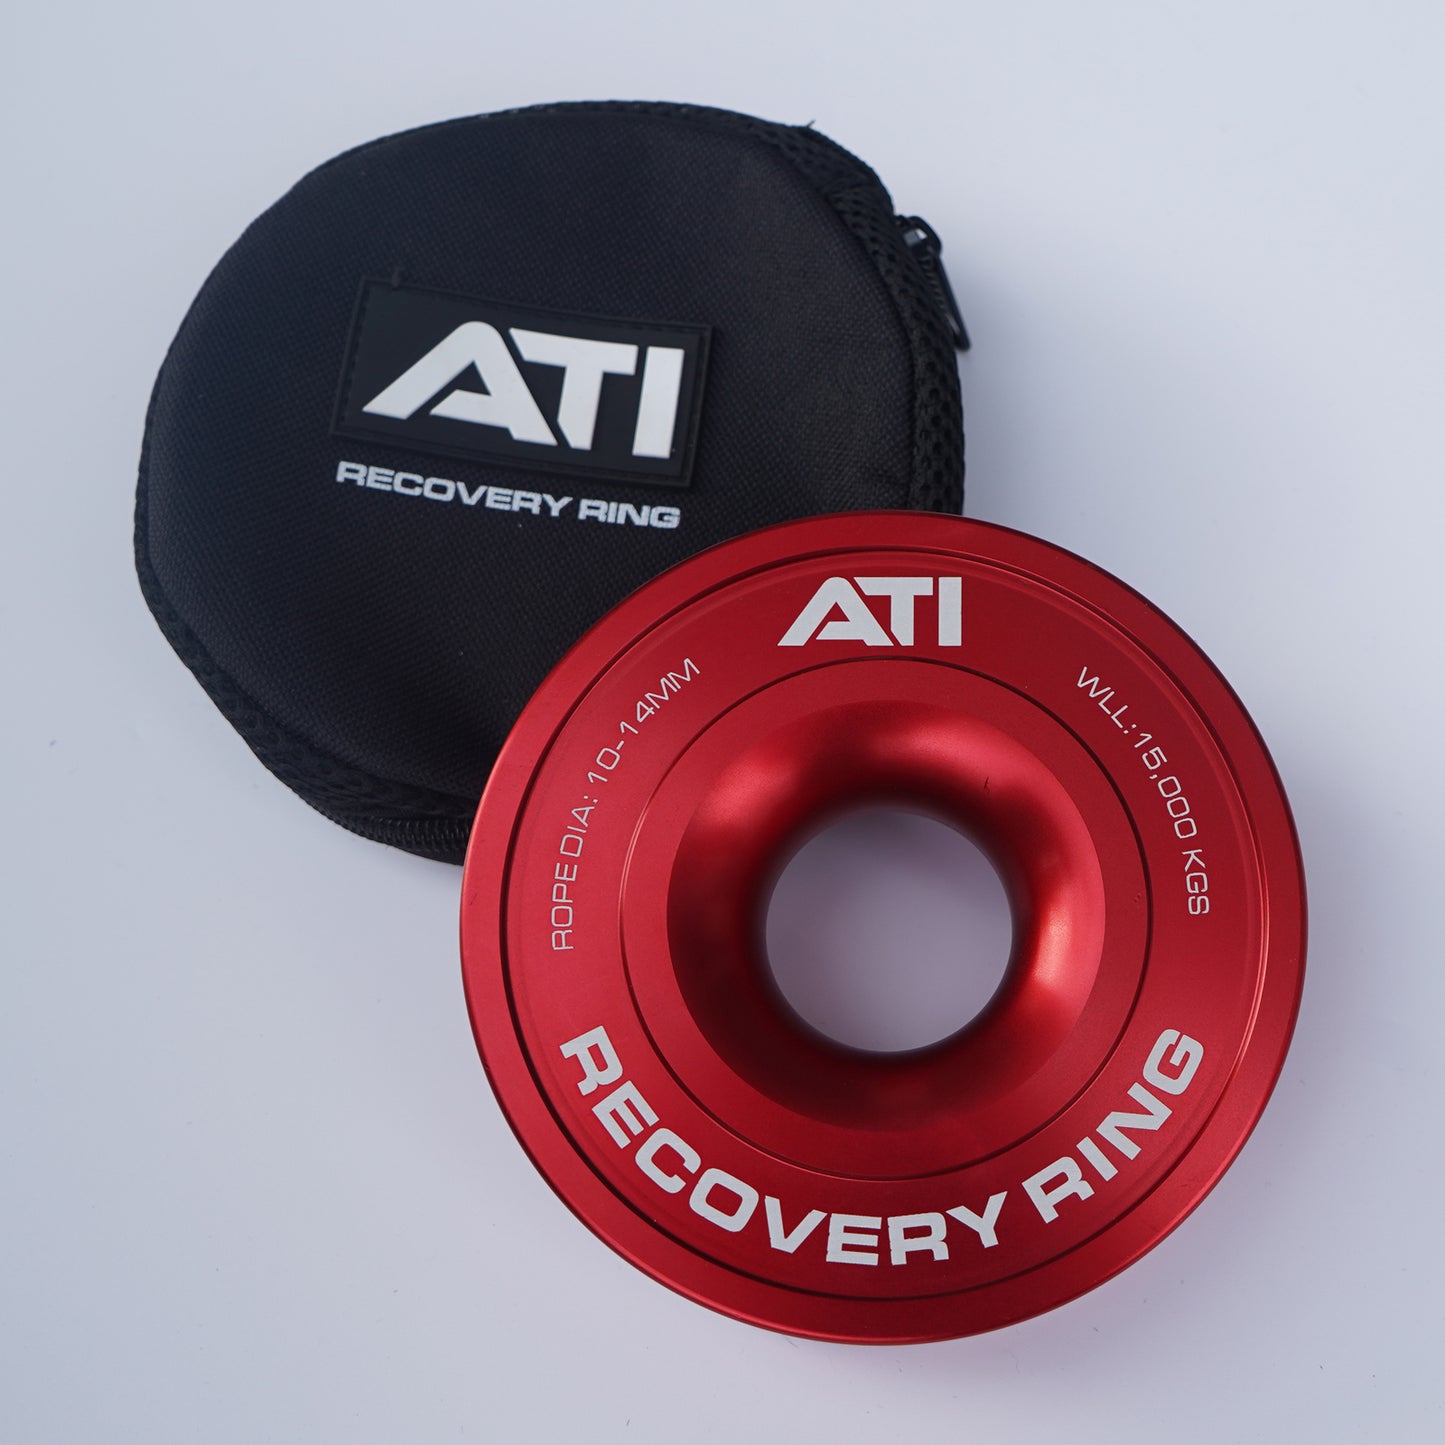 ATI 15,000KG ALLOY RECOVERY RING